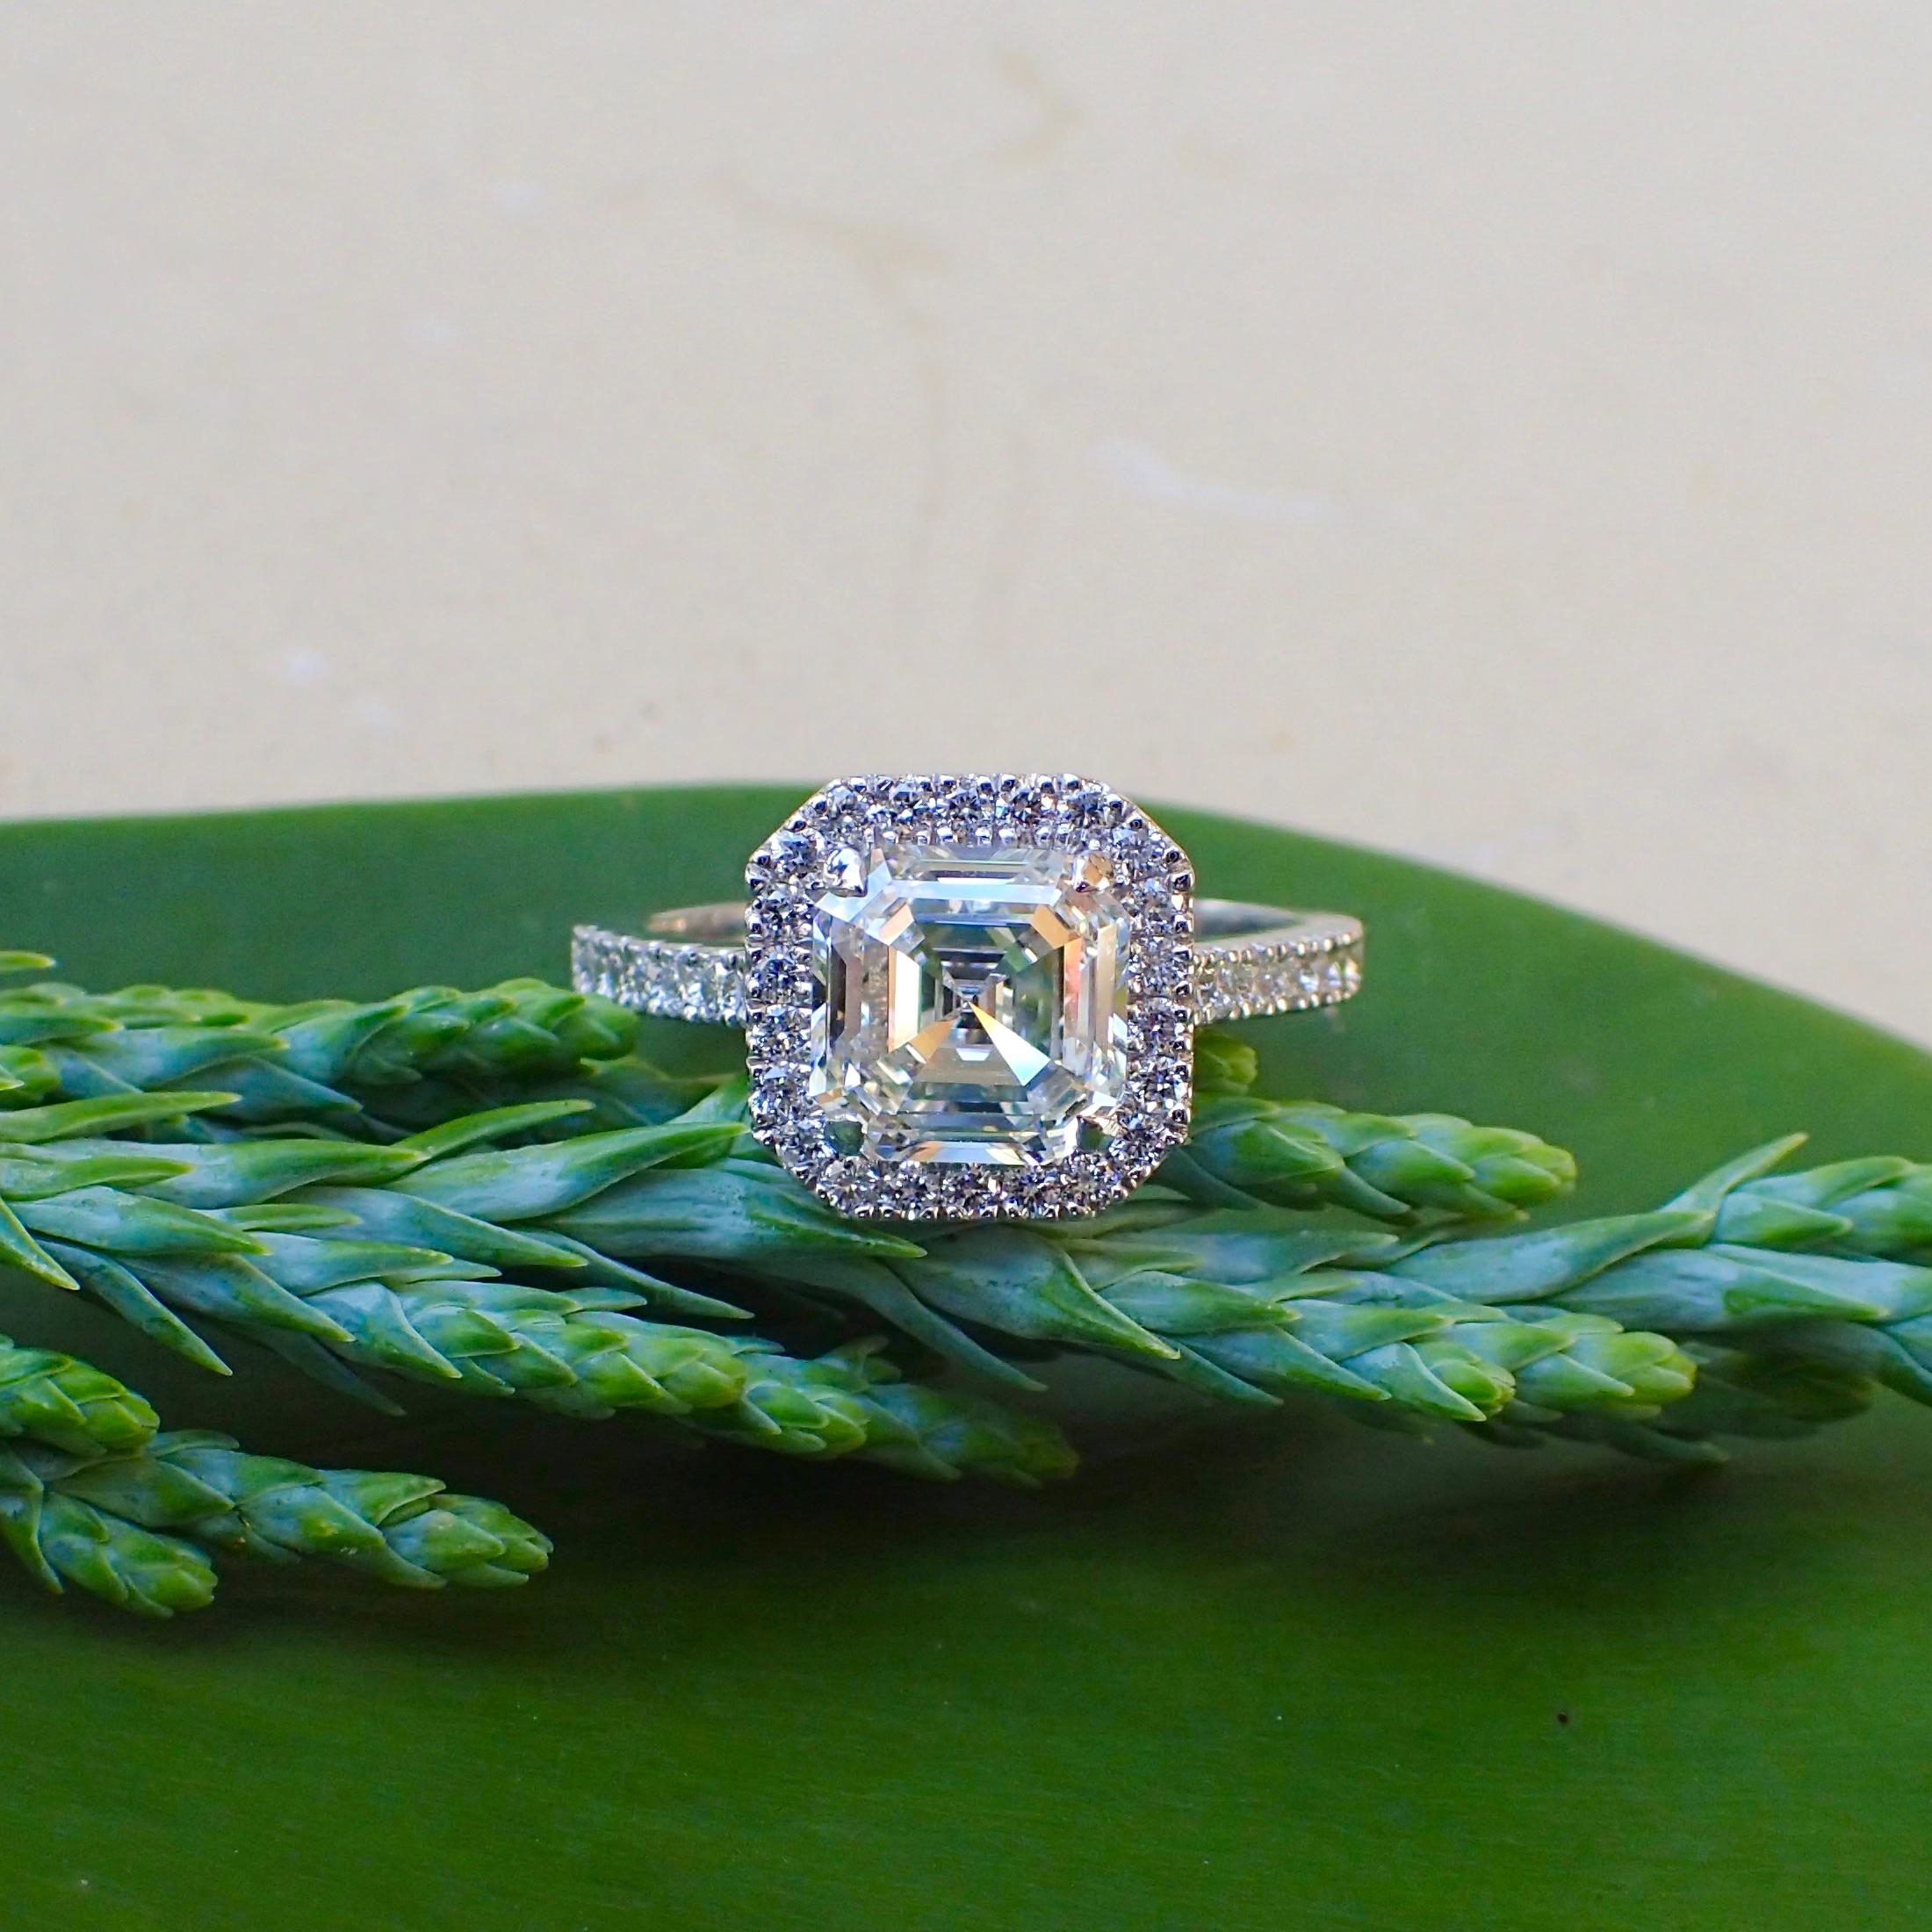 One (1) 18k white gold engagement ring contains one (1) Square Emerald Cut diamond that weighs 2.01 carats that measures 7.18 x 7.17 x 4.38mm with Clarity Grade SI1 with Color Grade G with Very Good Polish with Excellent Symmetry (see GIA Report